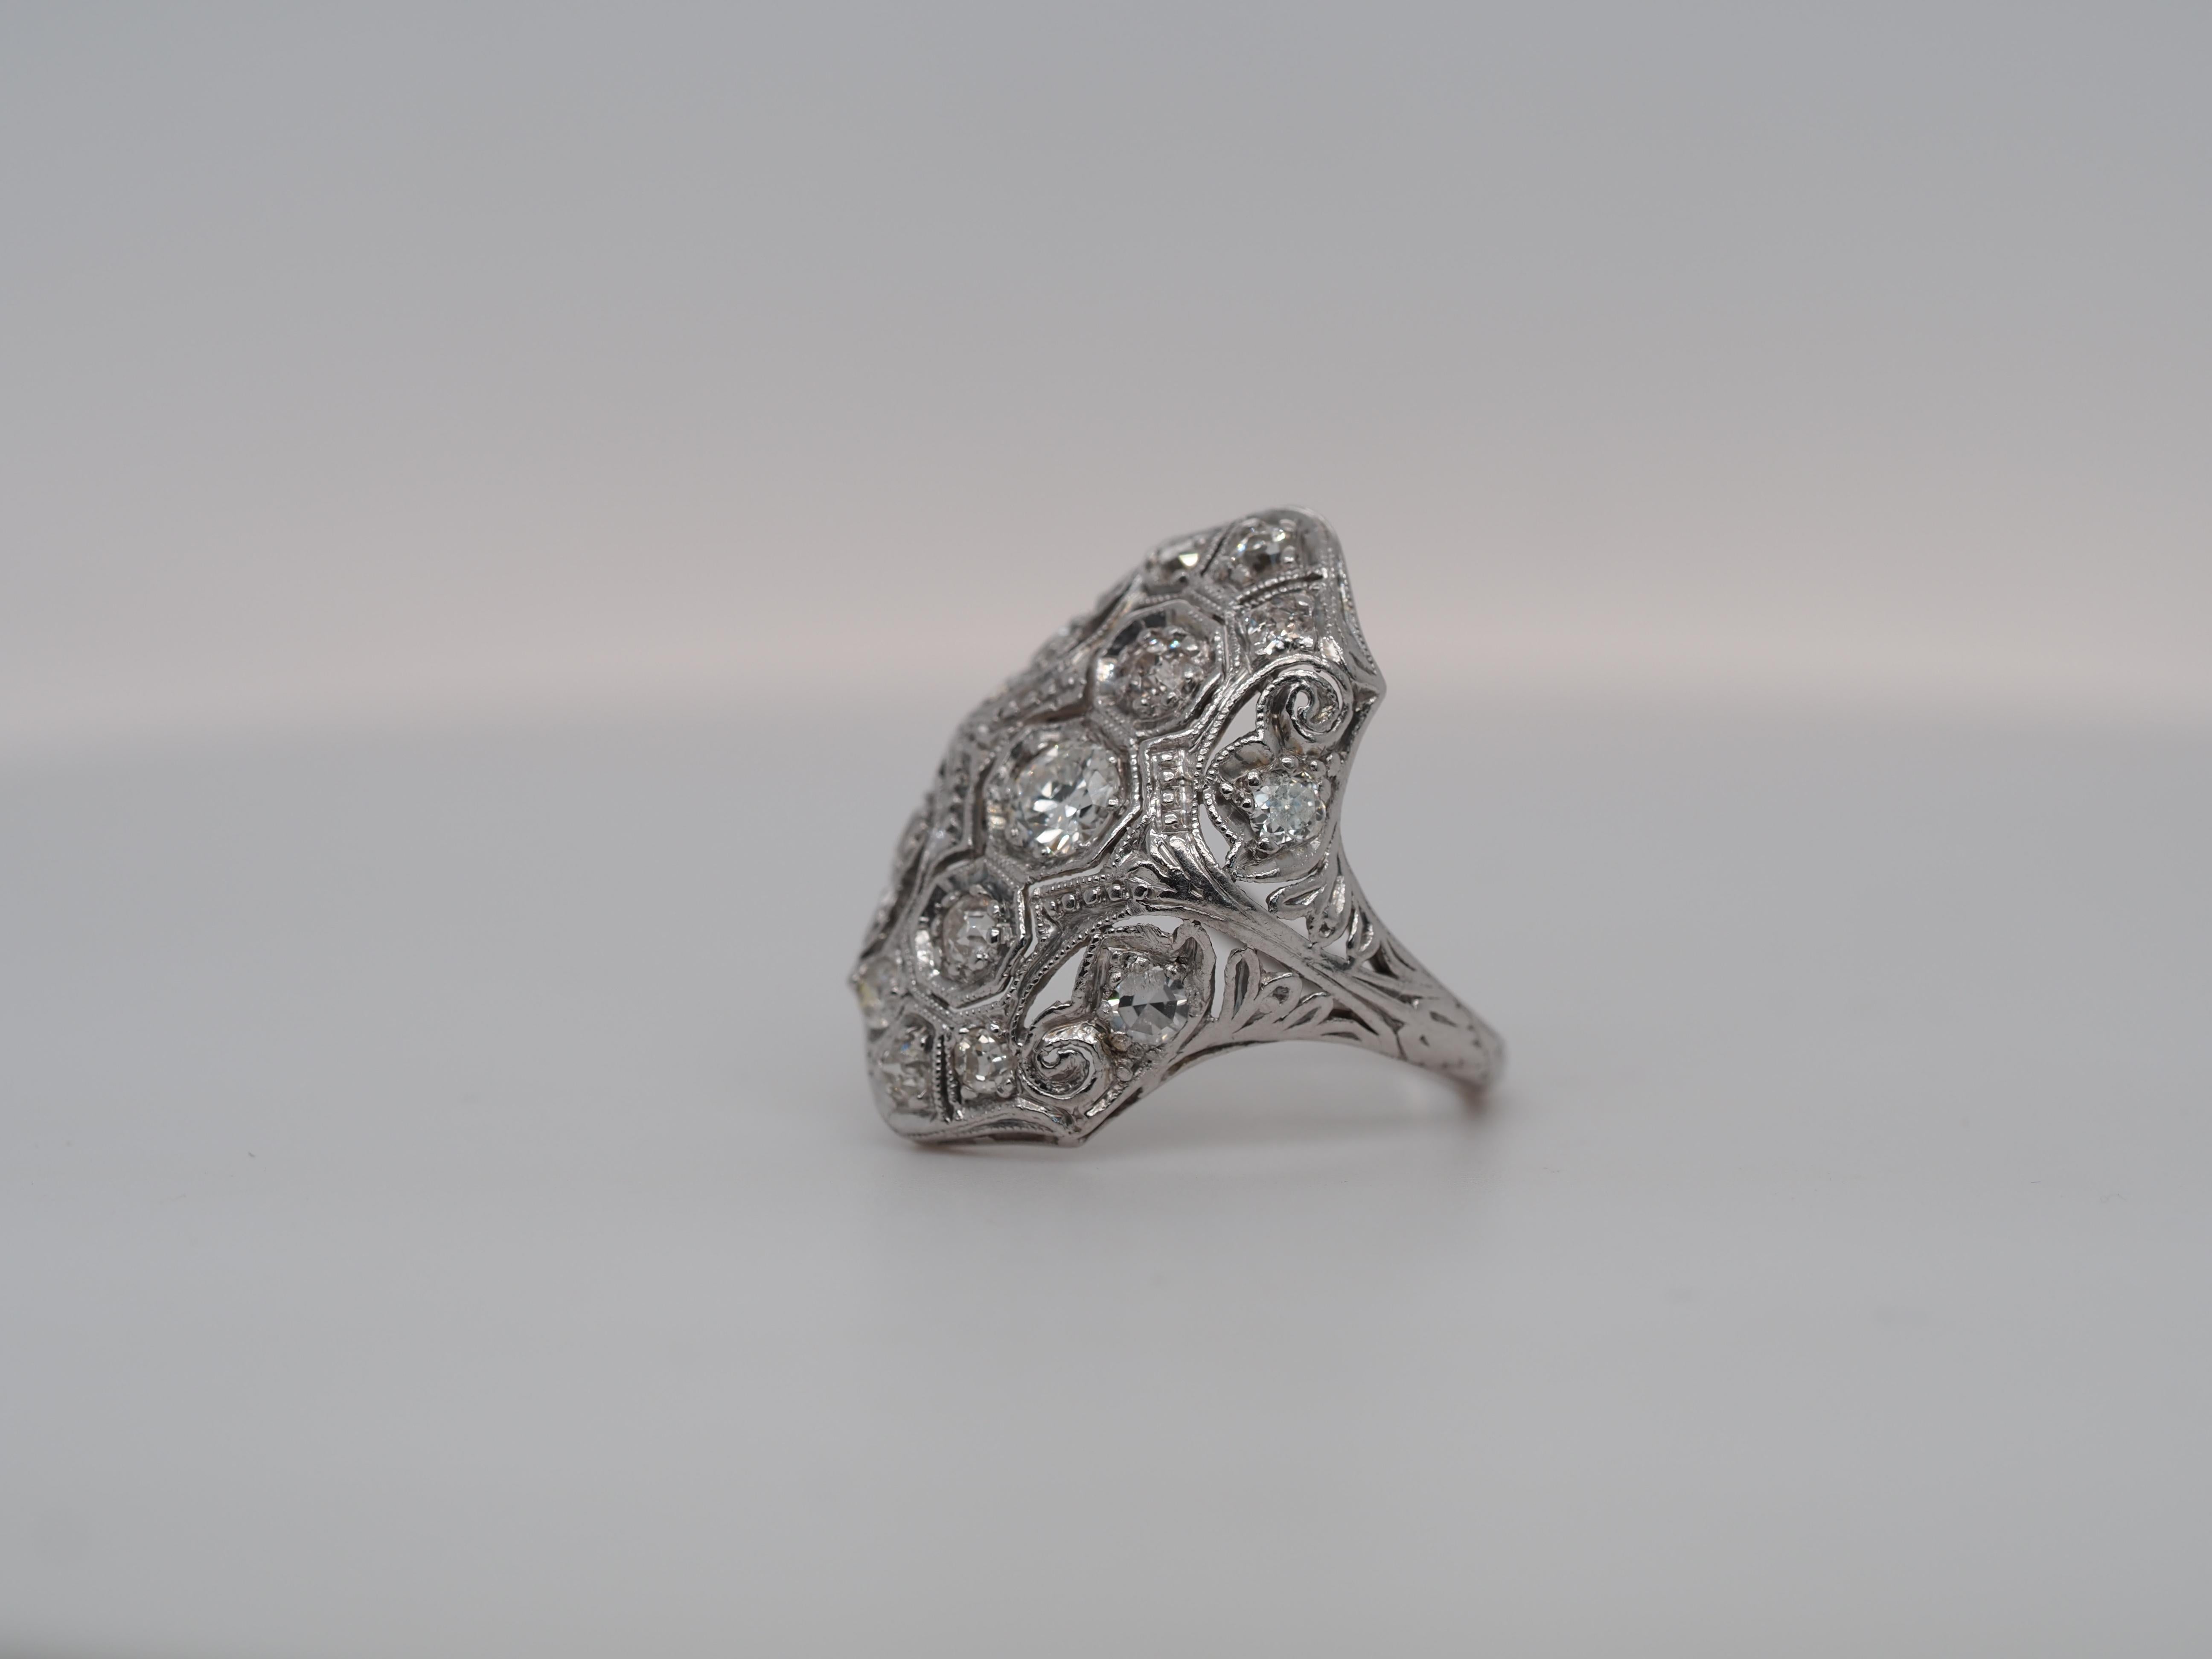 Item Details:
Ring Size: 4.25
Metal Type: Platinum [Hallmarked, and Tested]
Weight: 4.1 grams
Diamond Details: .60ct, total weight, G Color, VS Clarity, Old European Cut Diamonds (natural)
Band Width: 1.5 mm
Condition: Excellent